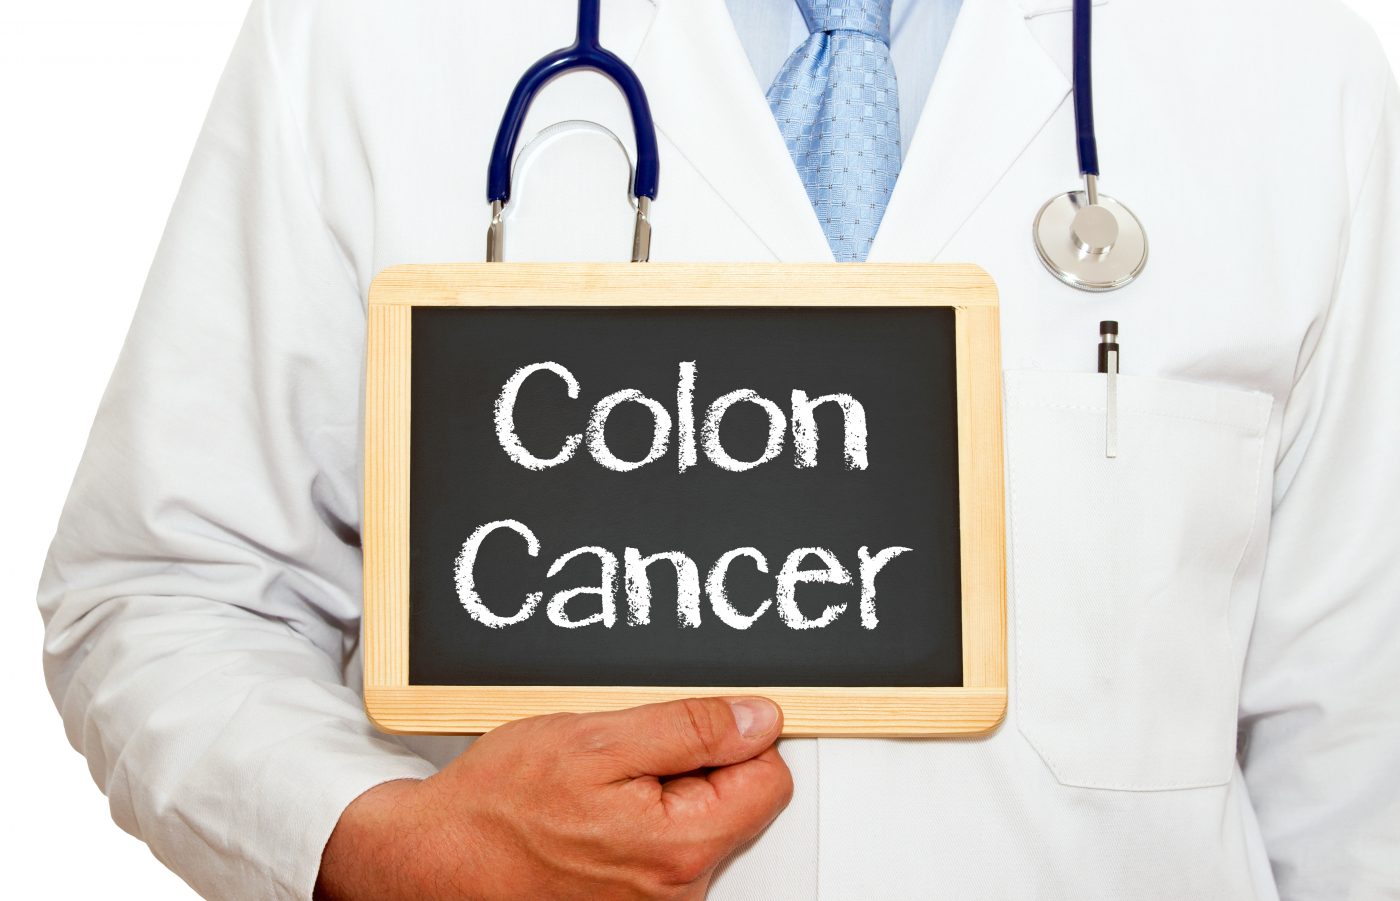 Patient Is Key Factor That Predicts Colorectal Cancer Screening, Study Finds